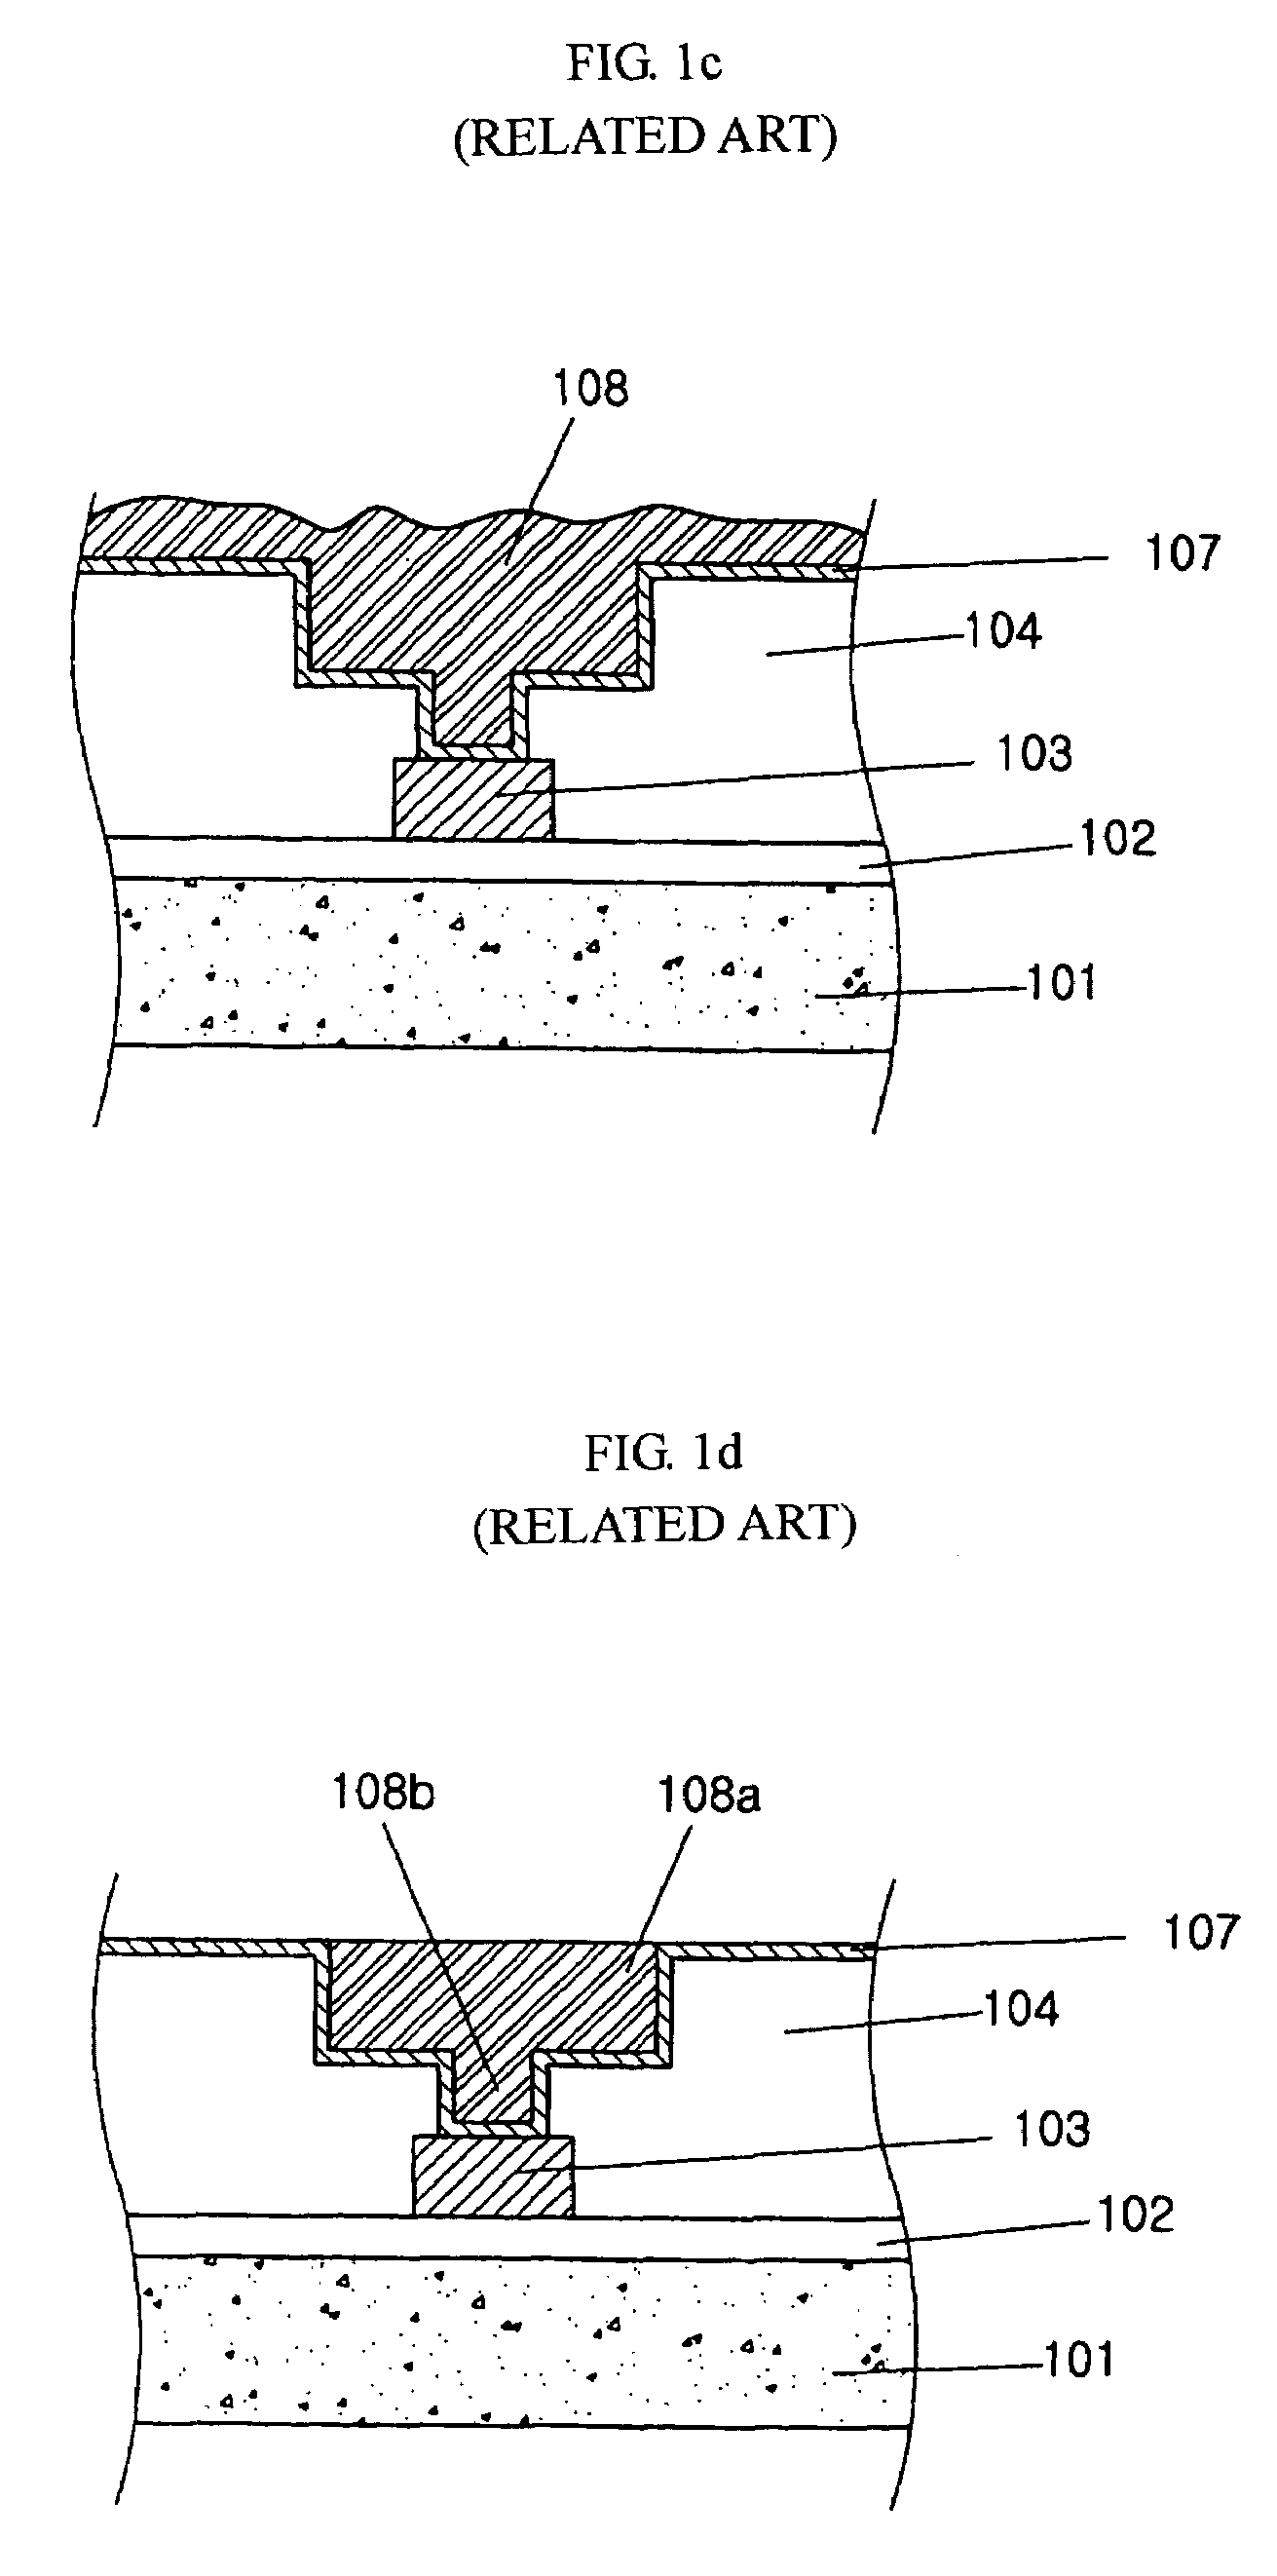 Method of manufacturing a semiconductor device without oxidized copper layer